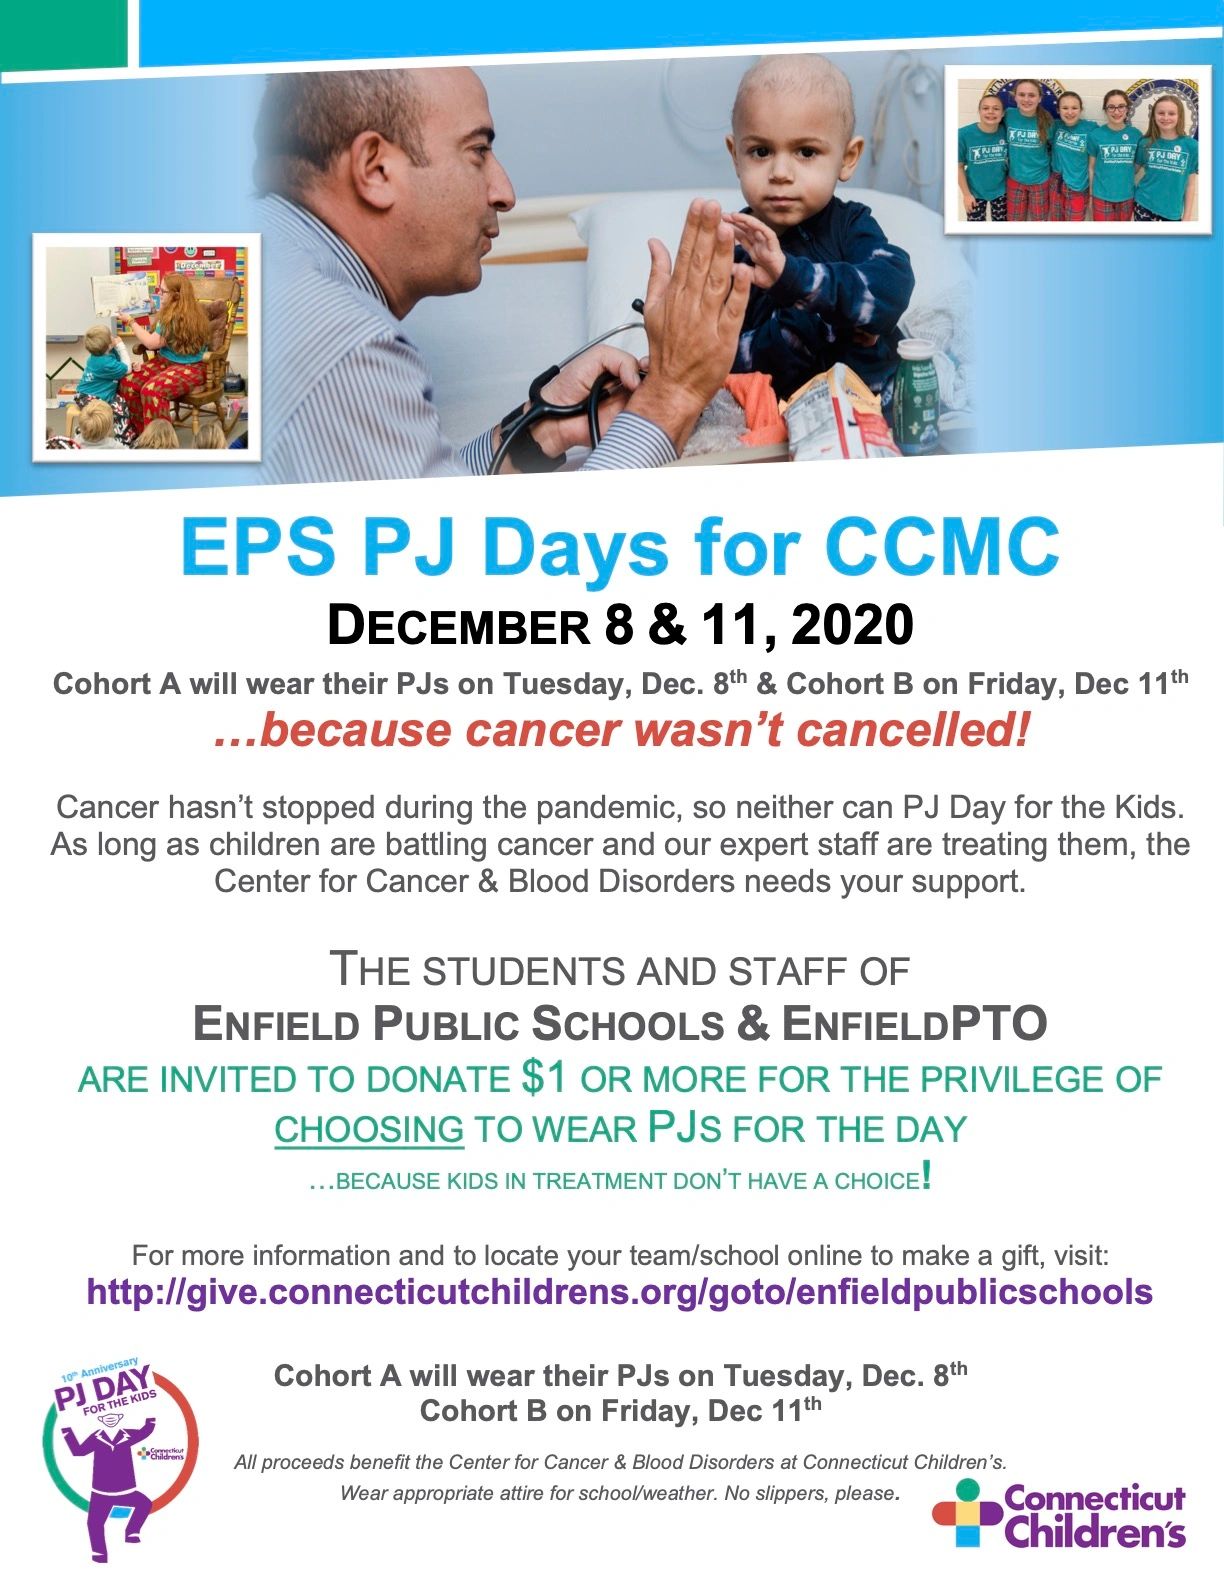 EPS & EnfieldPTO PJ Day for CCMC The Week of Dec. 11th